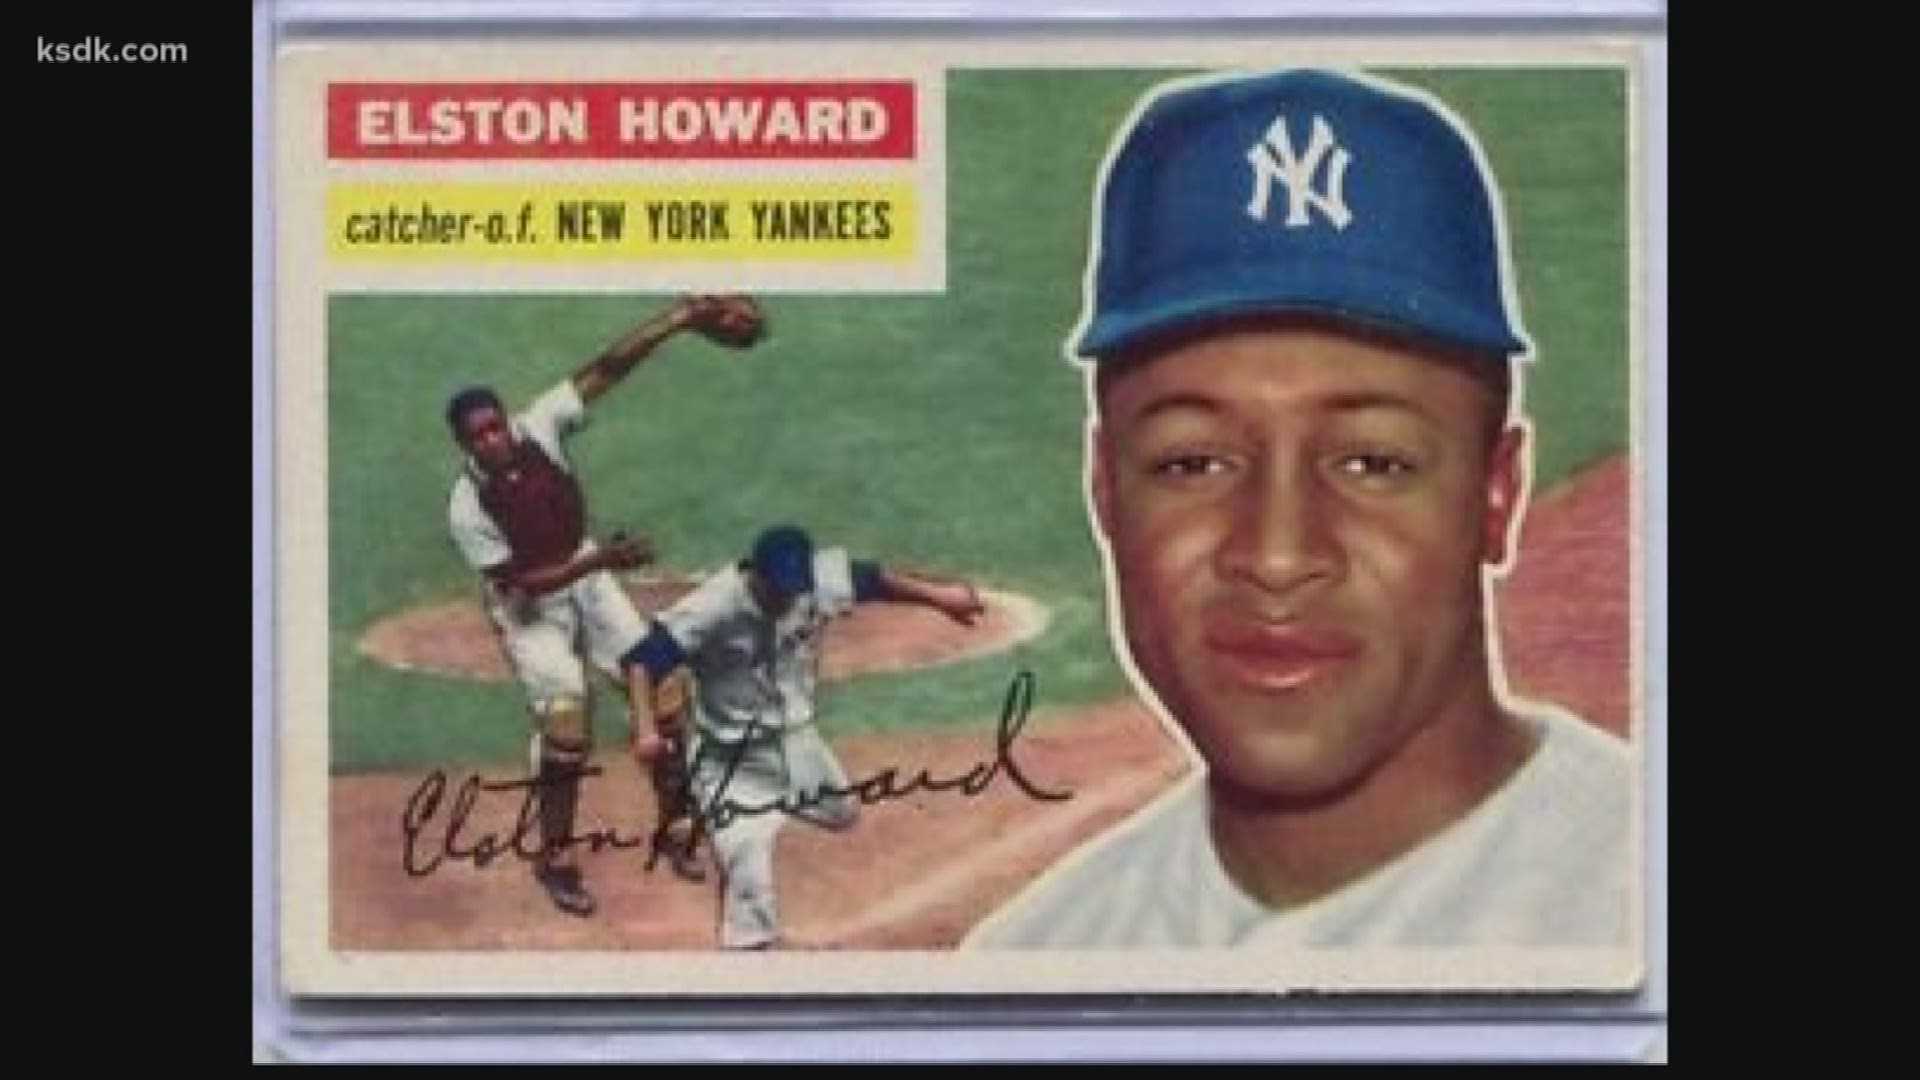 Elston Howard was the first black player on the Yankees and succeeded fellow St. Louis native Yogi Berra.